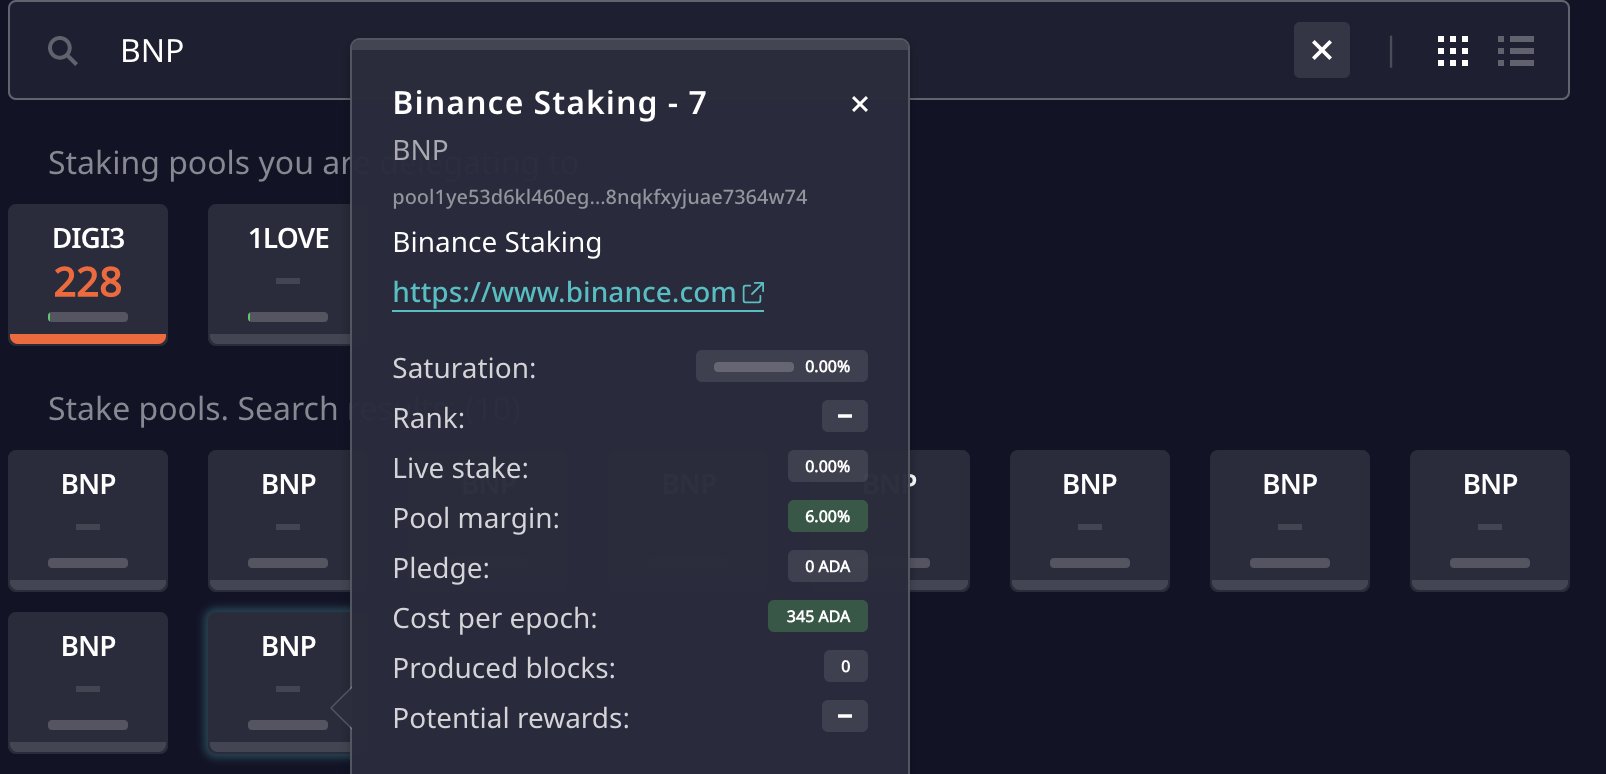 Binance Is Likely Behind About 18 Stake Pools on the Cardano Network